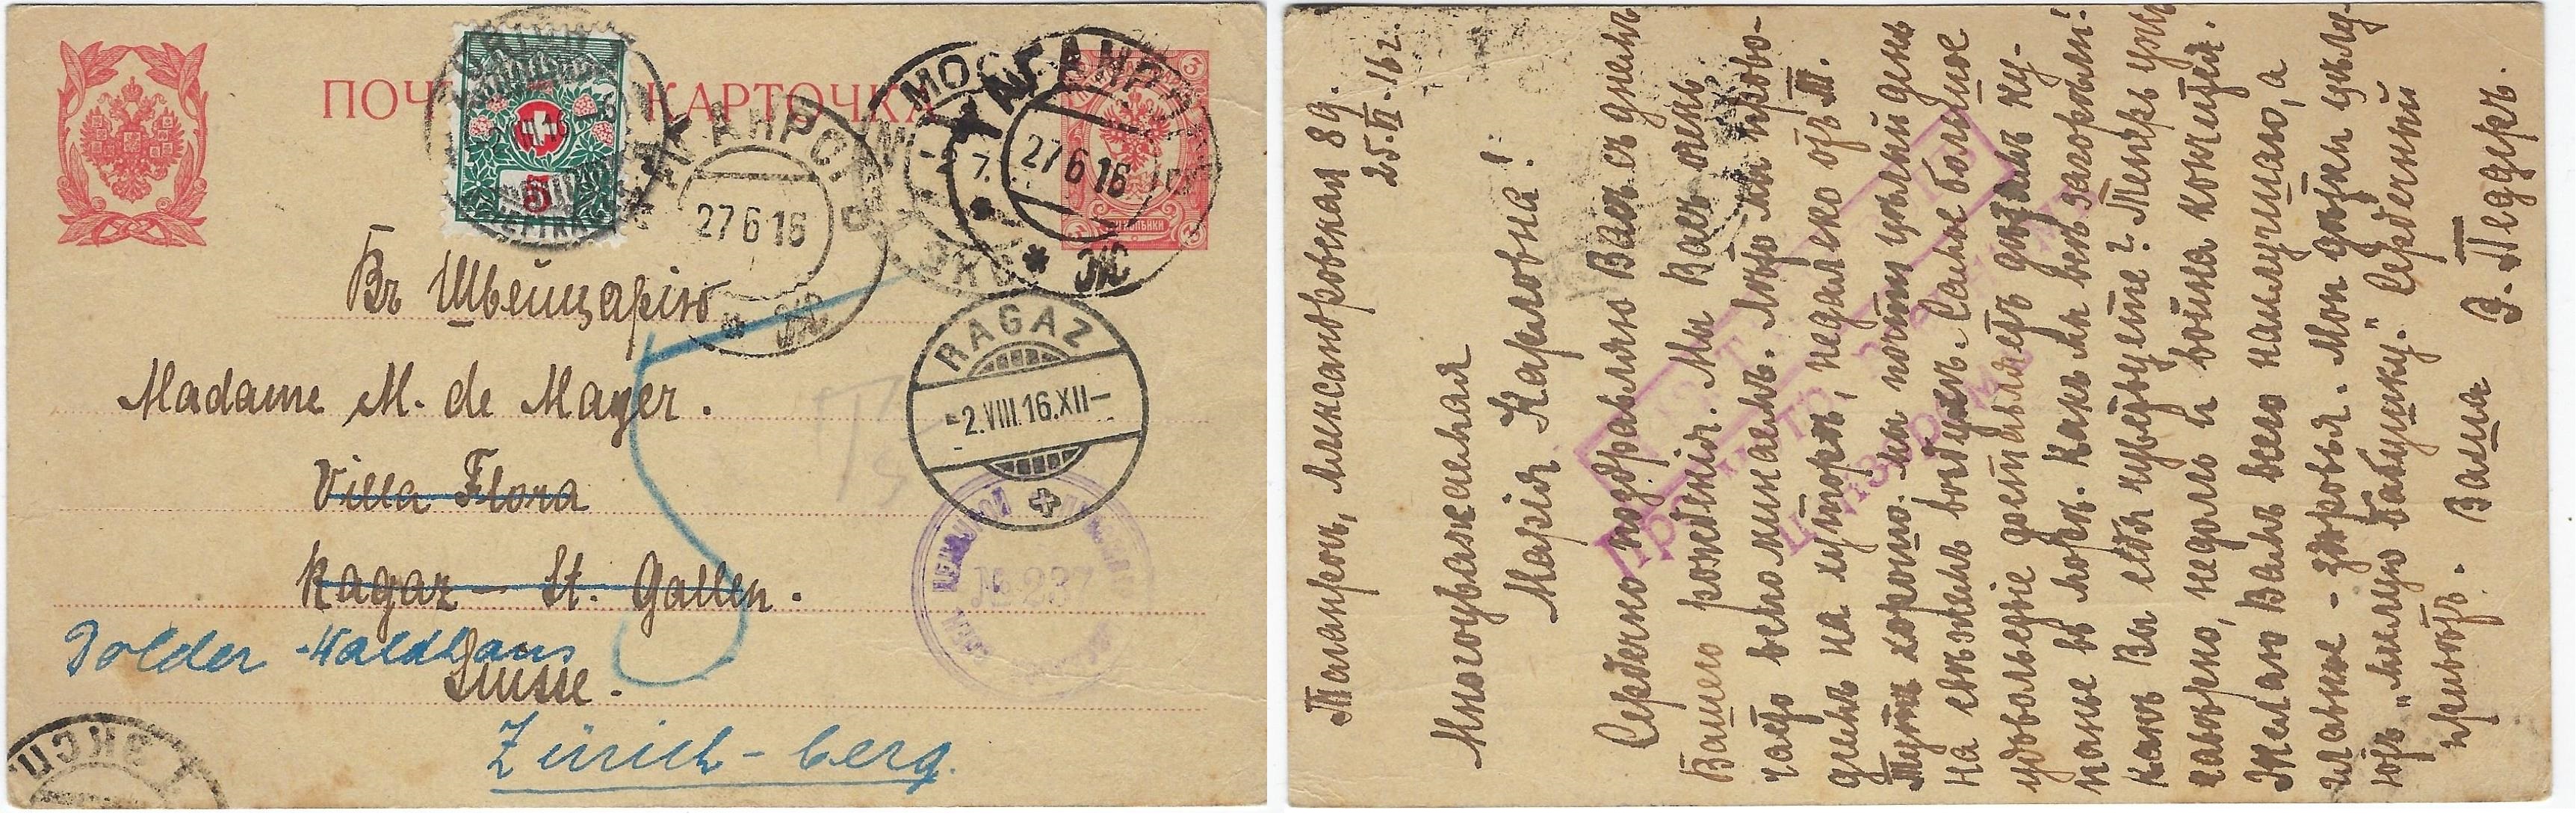 Russia Postal History - Postmarks Postage due Scott 5a1916 